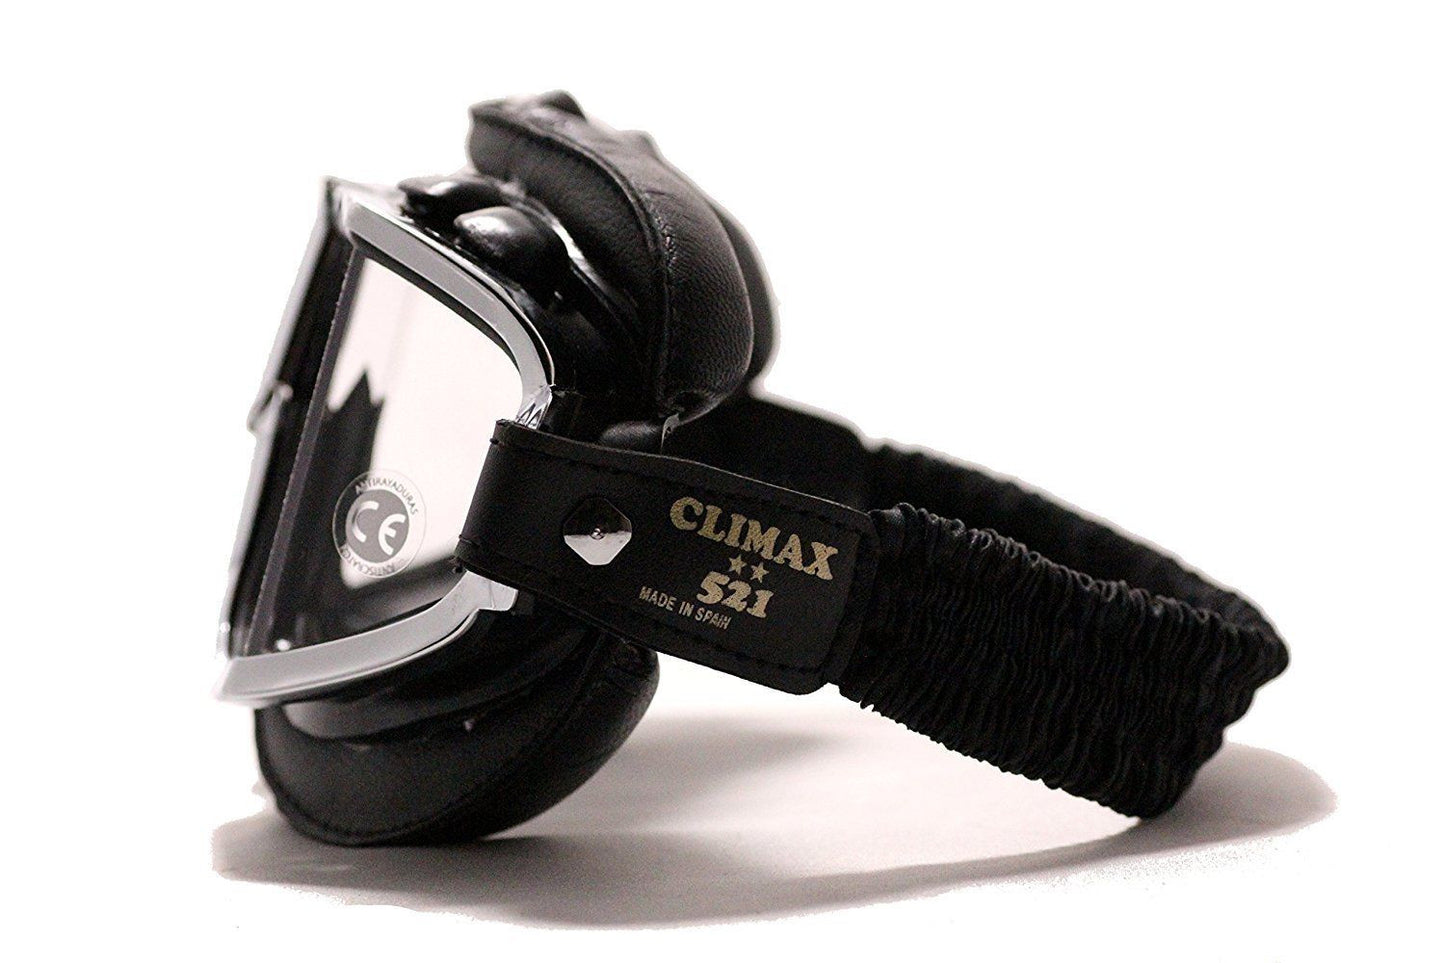 Common terms and phrases: climax custom 521 made by Google in Spain